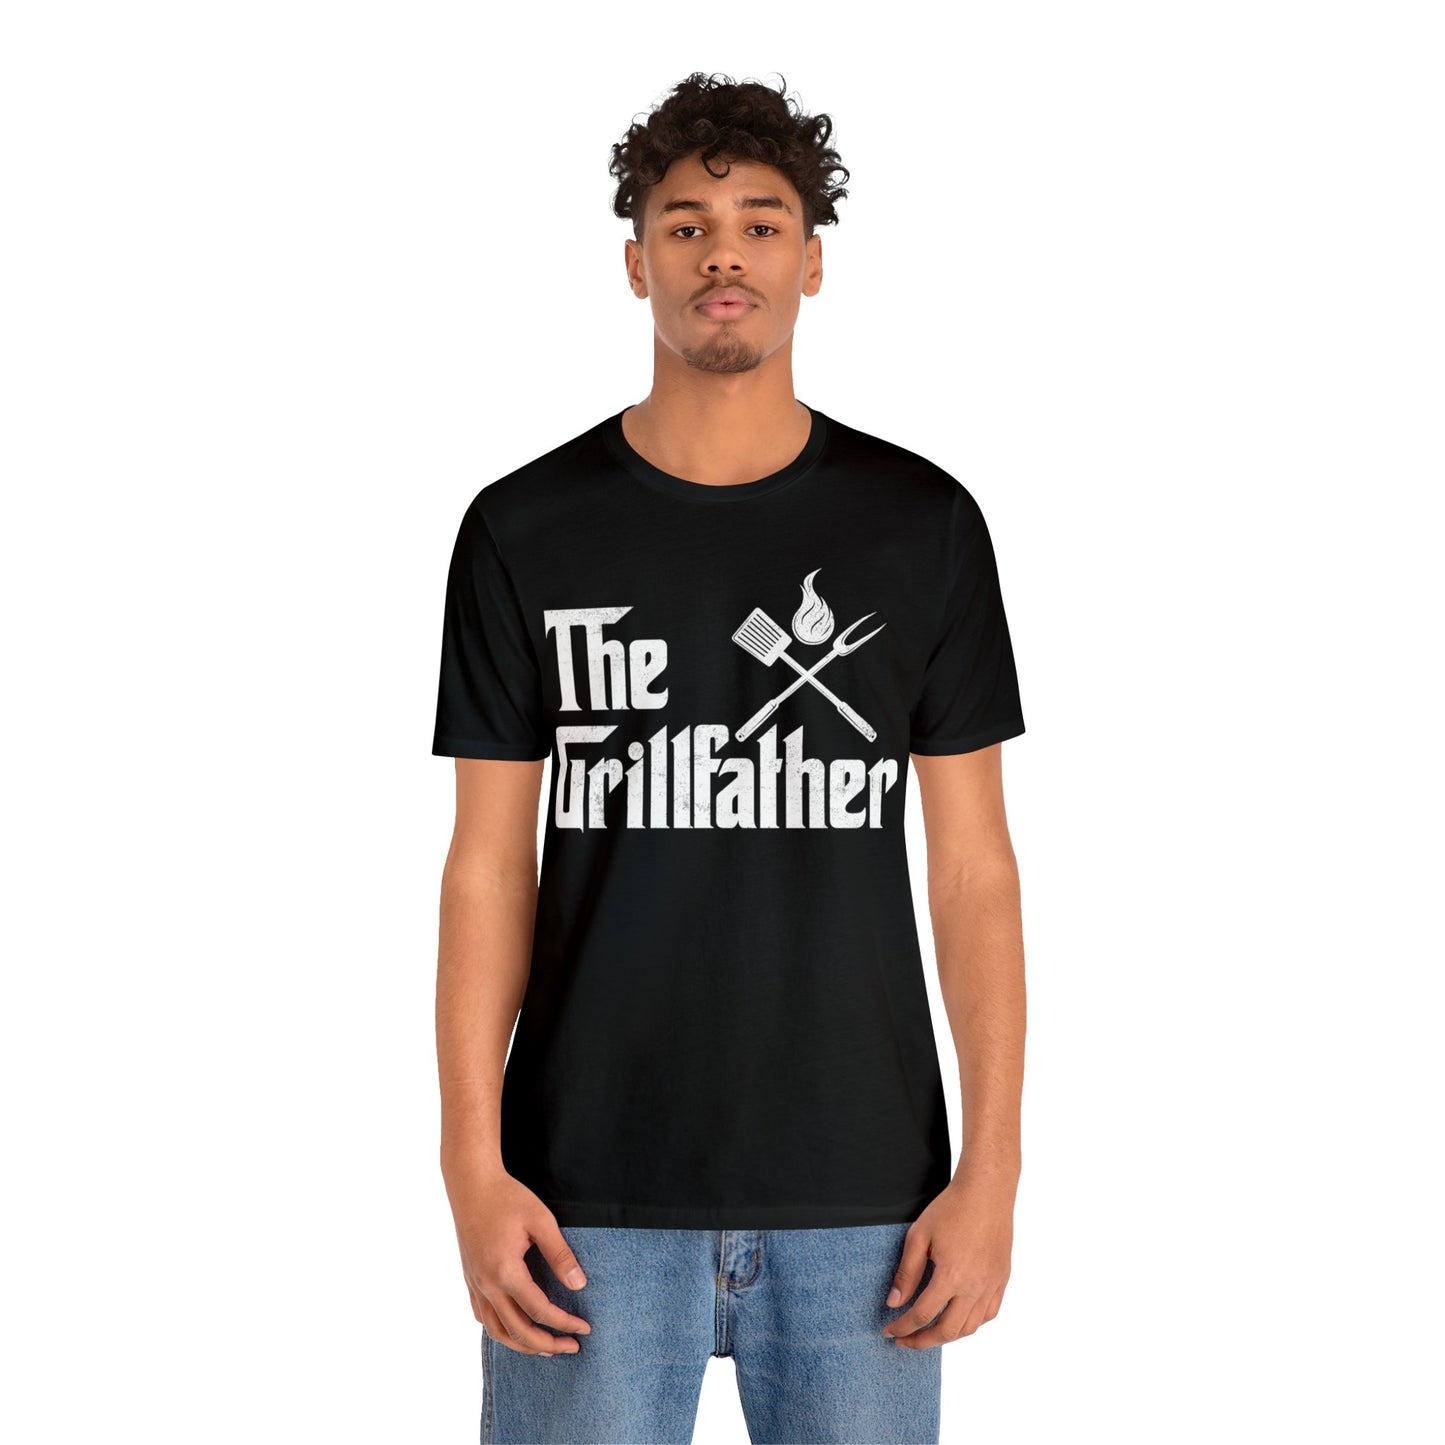 The Grillfather  T-Shirt